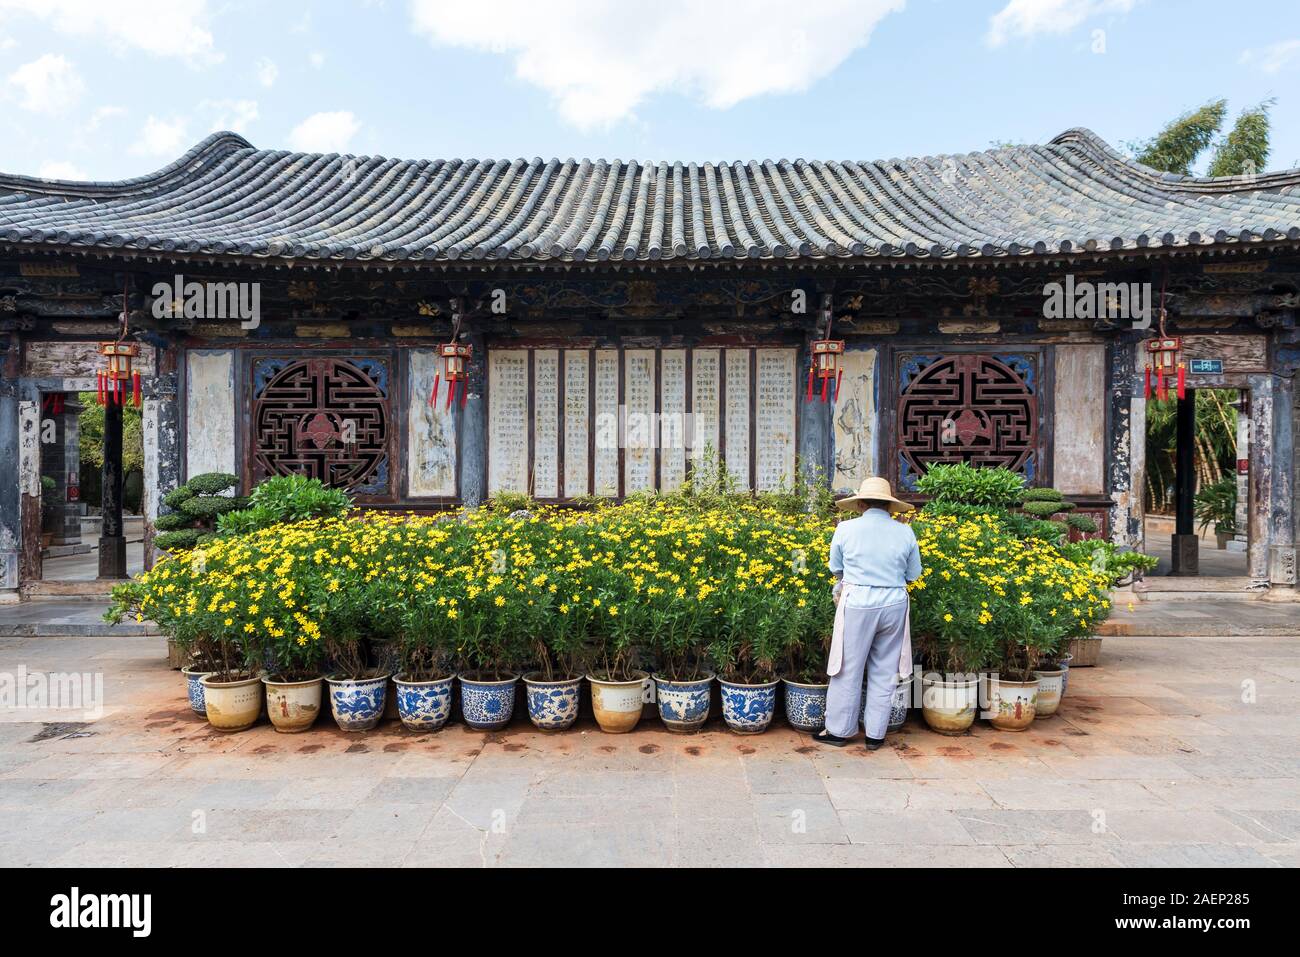 March 7, 2019: Gardener taking care of some plants in a historic building at the city of Jianshui, Yunnan, China Stock Photo